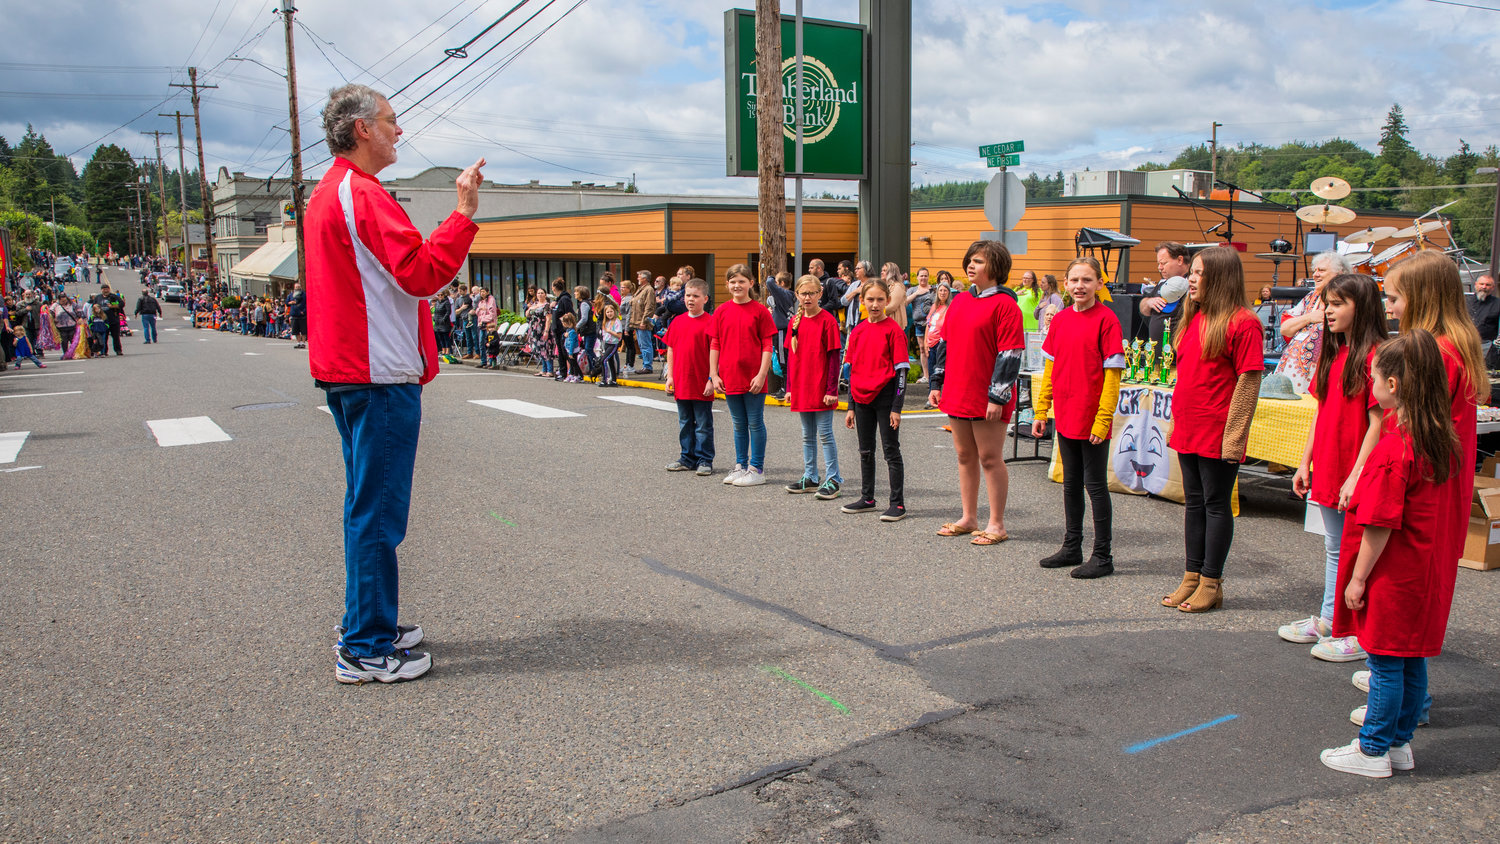 Kids sing and crowds cover their hearts before the start of the Egg Days Festival parade in Winlock on Saturday.